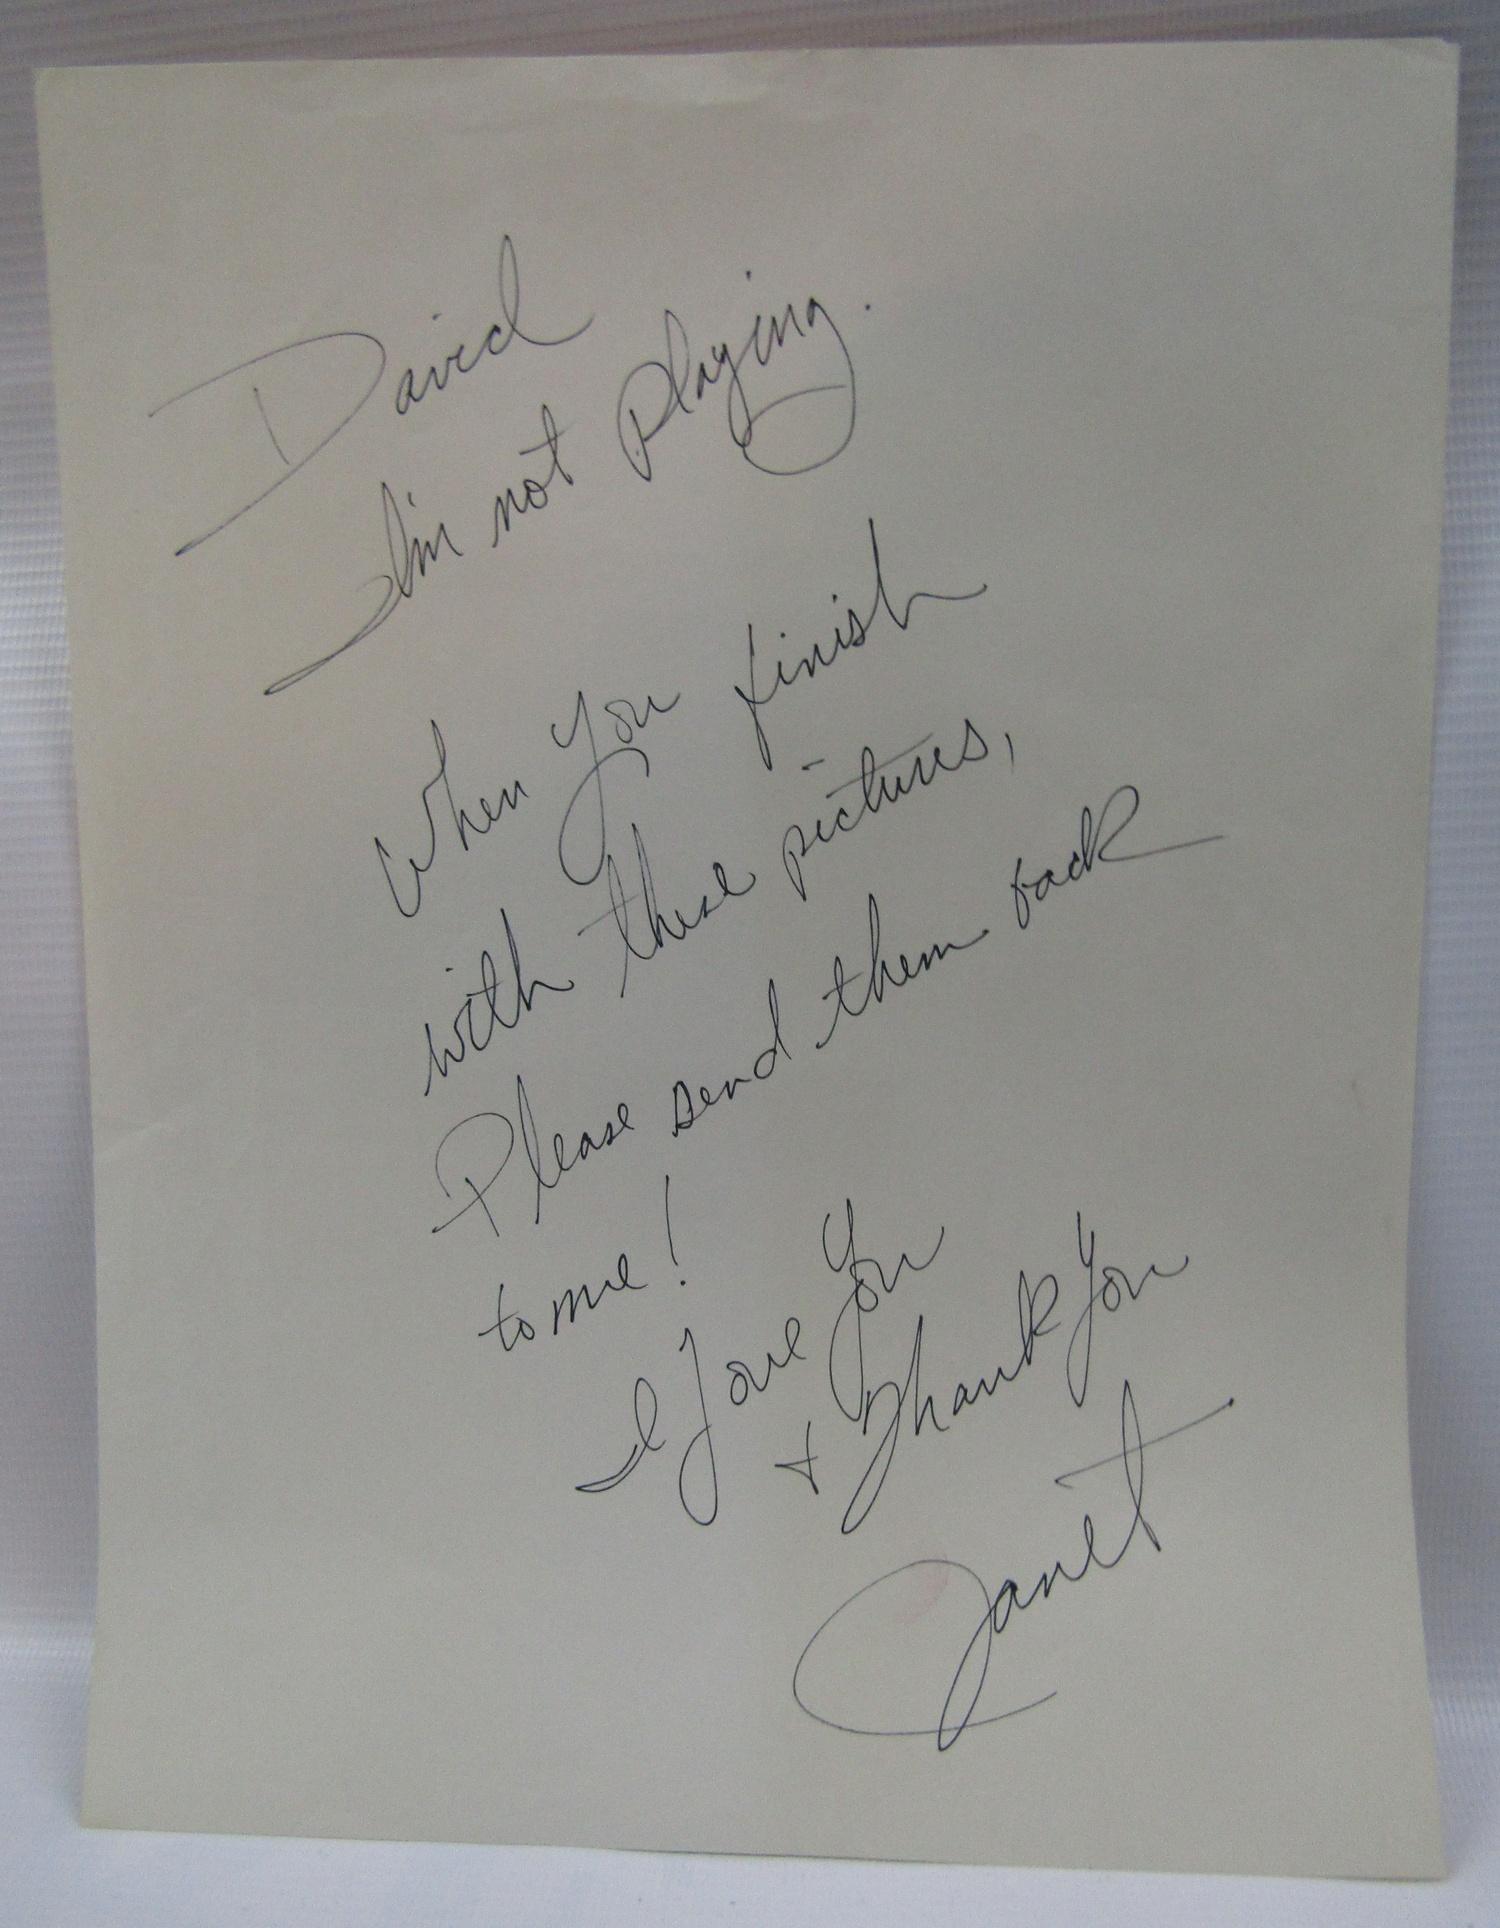 Janet Jackson eight line letter to David Gest signed Janet